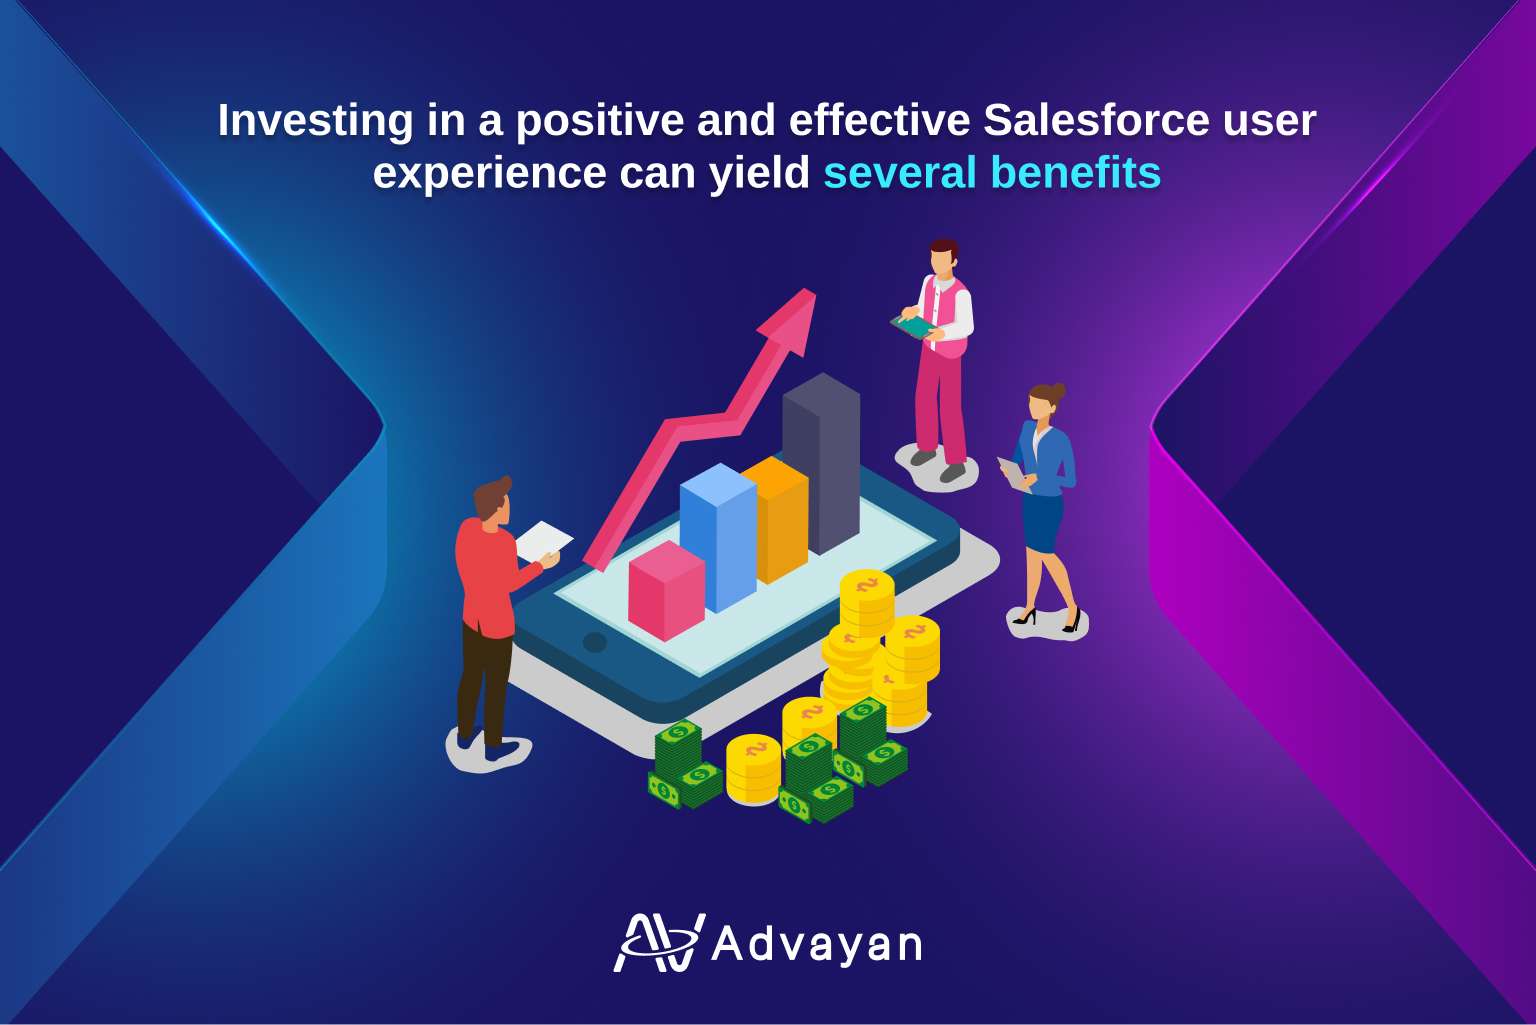 Investing in a positive and effective Salesforce user experience can yield several benefits